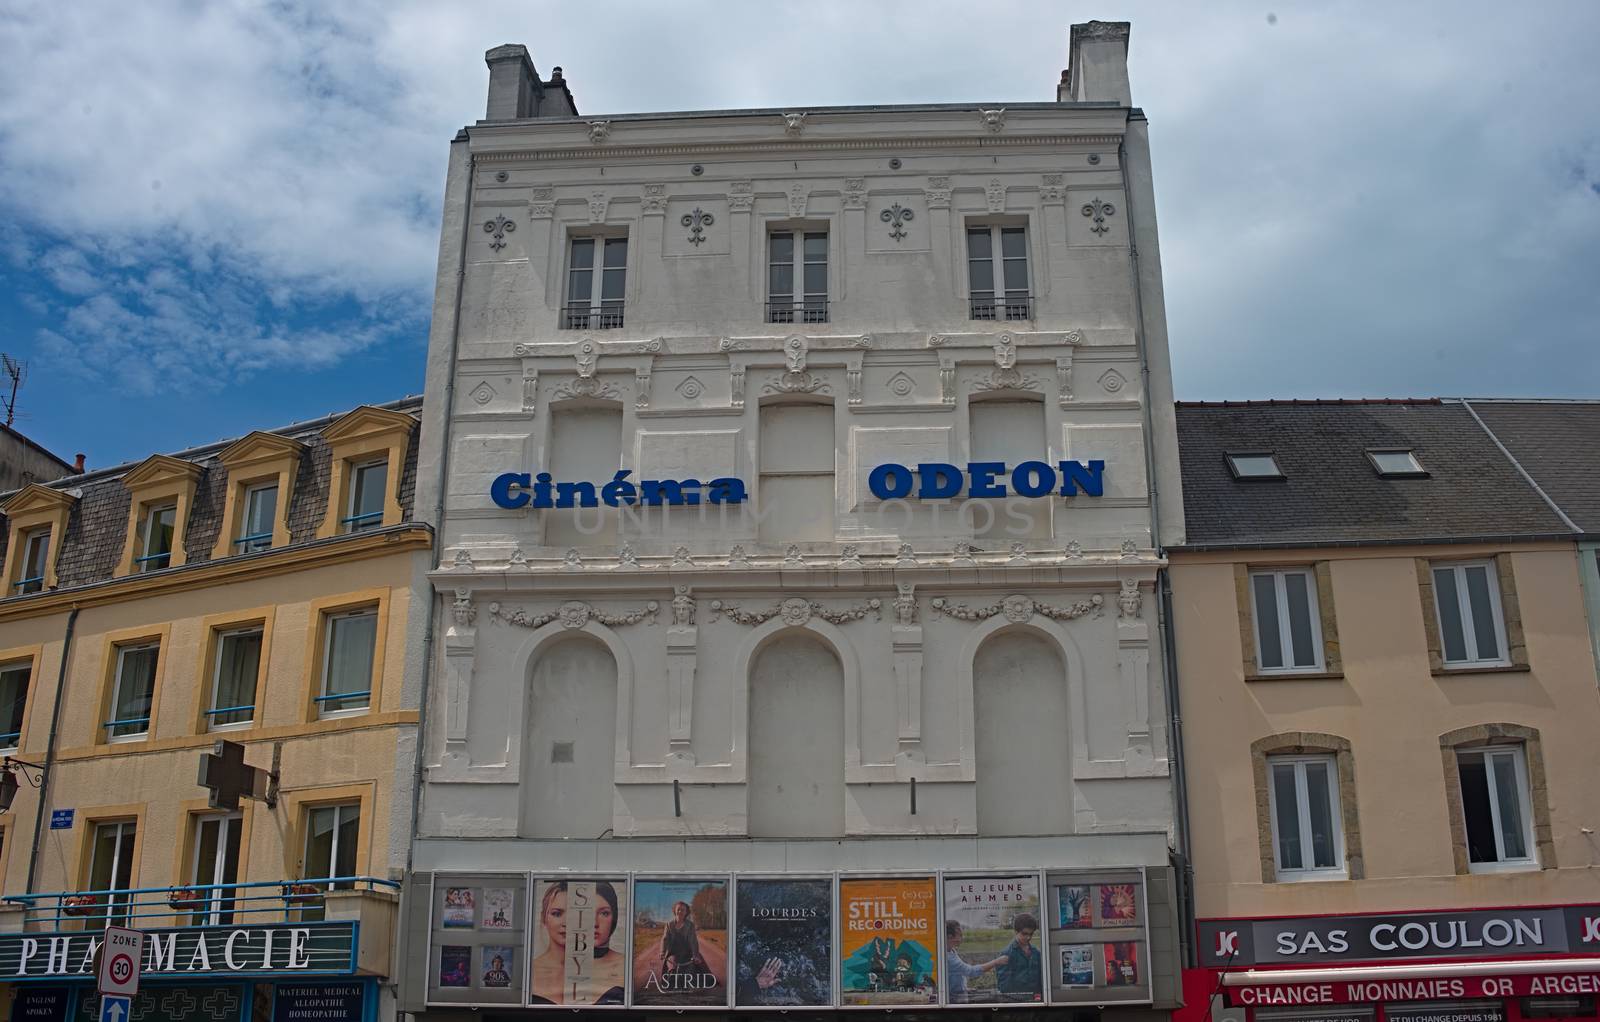 CHERBOURG, FRANCE - June 6th 2019 - Cinema building by sheriffkule